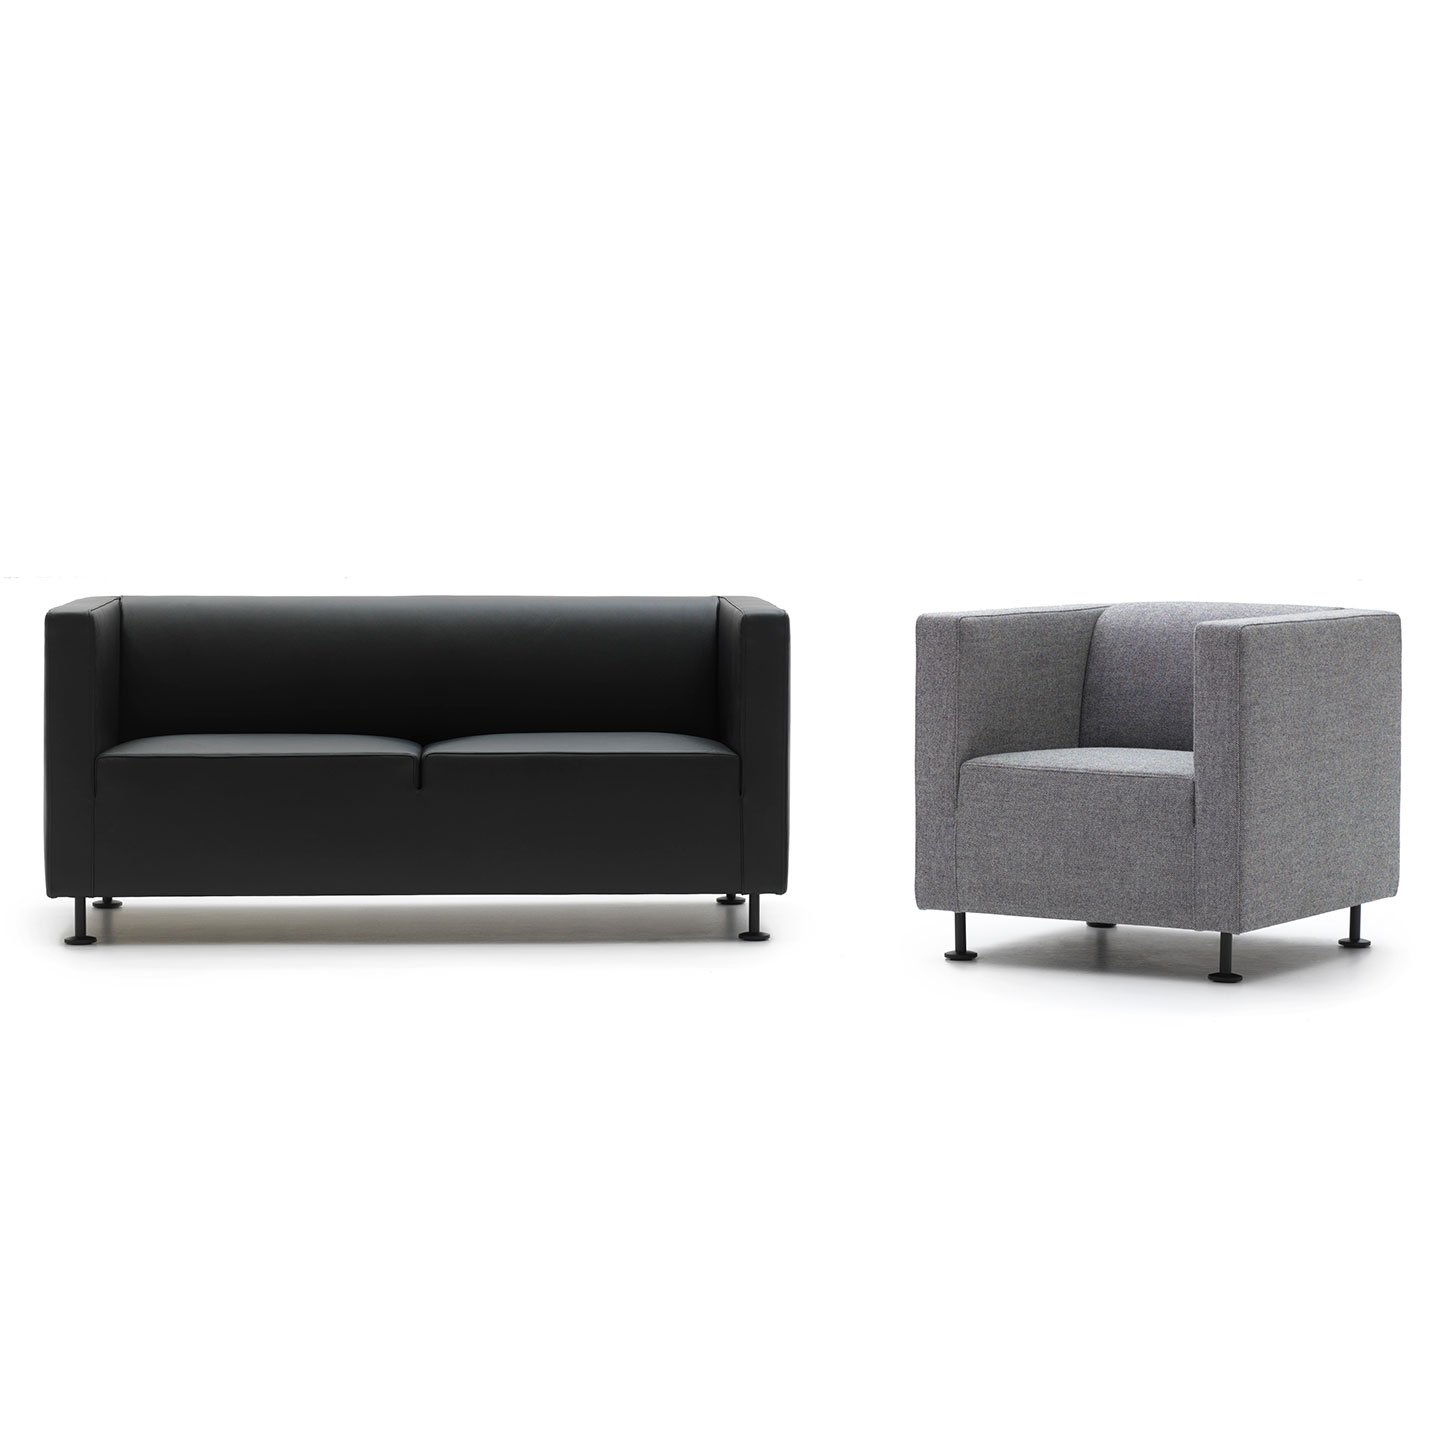 Haworth Gambetta sofas in black and grey in single seater and double seater options